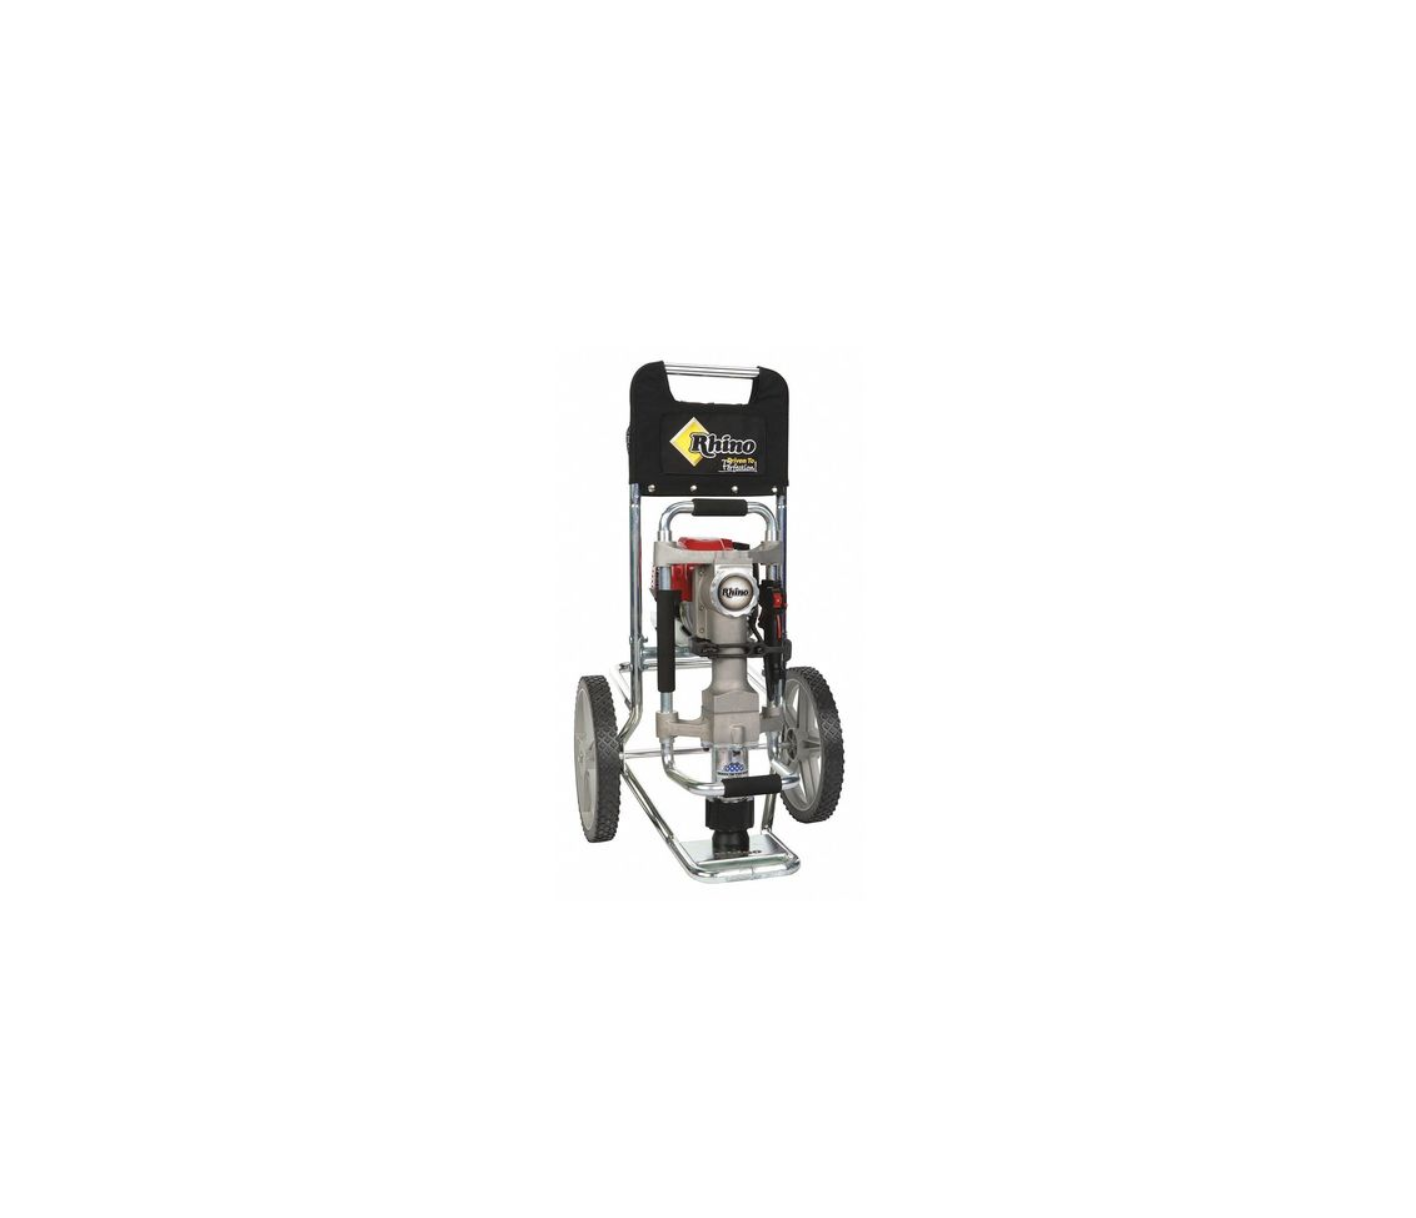 gpd-30 ranch pro gas powered post driver